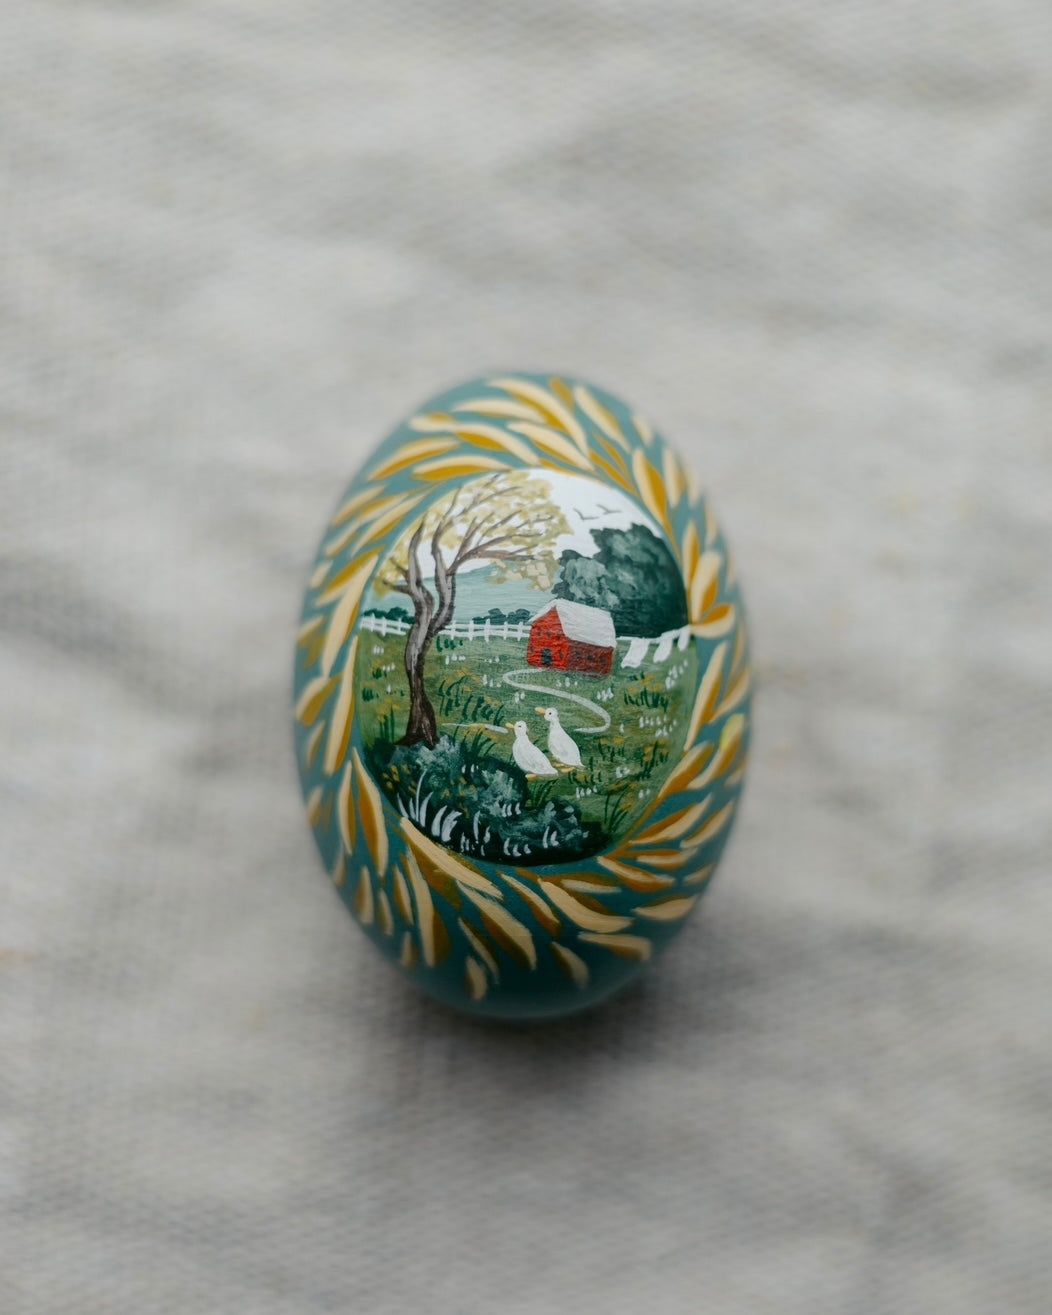 Heirloom Painted Egg- no. 2